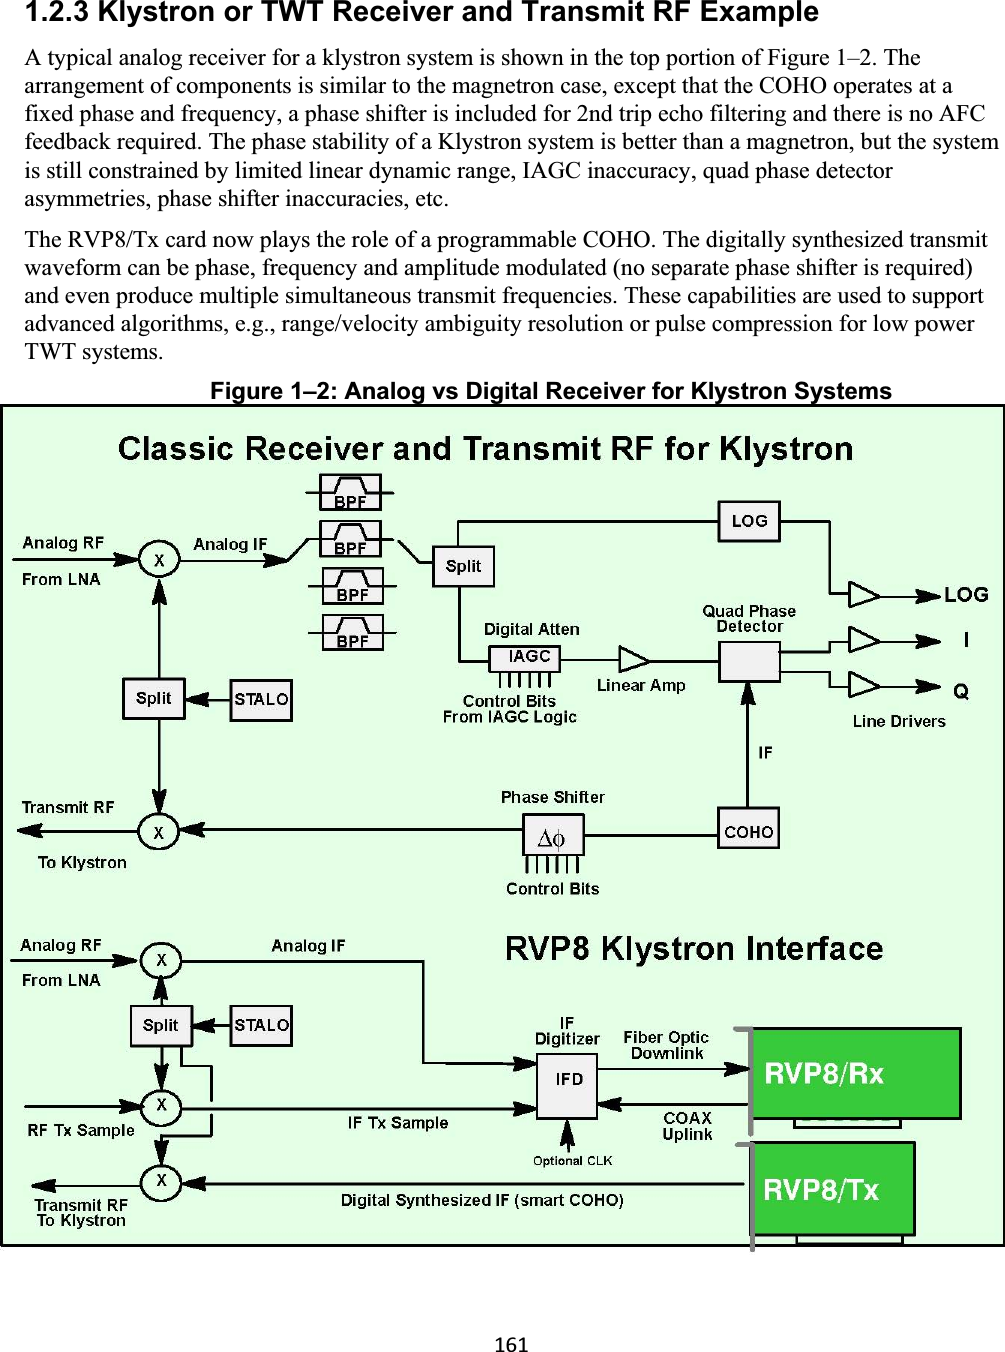 1611.2.3 Klystron or TWT Receiver and Transmit RF Example A typical analog receiver for a klystron system is shown in the top portion of Figure 1–2. The arrangement of components is similar to the magnetron case, except that the COHO operates at a fixed phase and frequency, a phase shifter is included for 2nd trip echo filtering and there is no AFC feedback required. The phase stability of a Klystron system is better than a magnetron, but the system is still constrained by limited linear dynamic range, IAGC inaccuracy, quad phase detector asymmetries, phase shifter inaccuracies, etc.  The RVP8/Tx card now plays the role of a programmable COHO. The digitally synthesized transmit waveform can be phase, frequency and amplitude modulated (no separate phase shifter is required) and even produce multiple simultaneous transmit frequencies. These capabilities are used to support advanced algorithms, e.g., range/velocity ambiguity resolution or pulse compression for low power TWT systems.  Figure 1–2: Analog vs Digital Receiver for Klystron Systems 